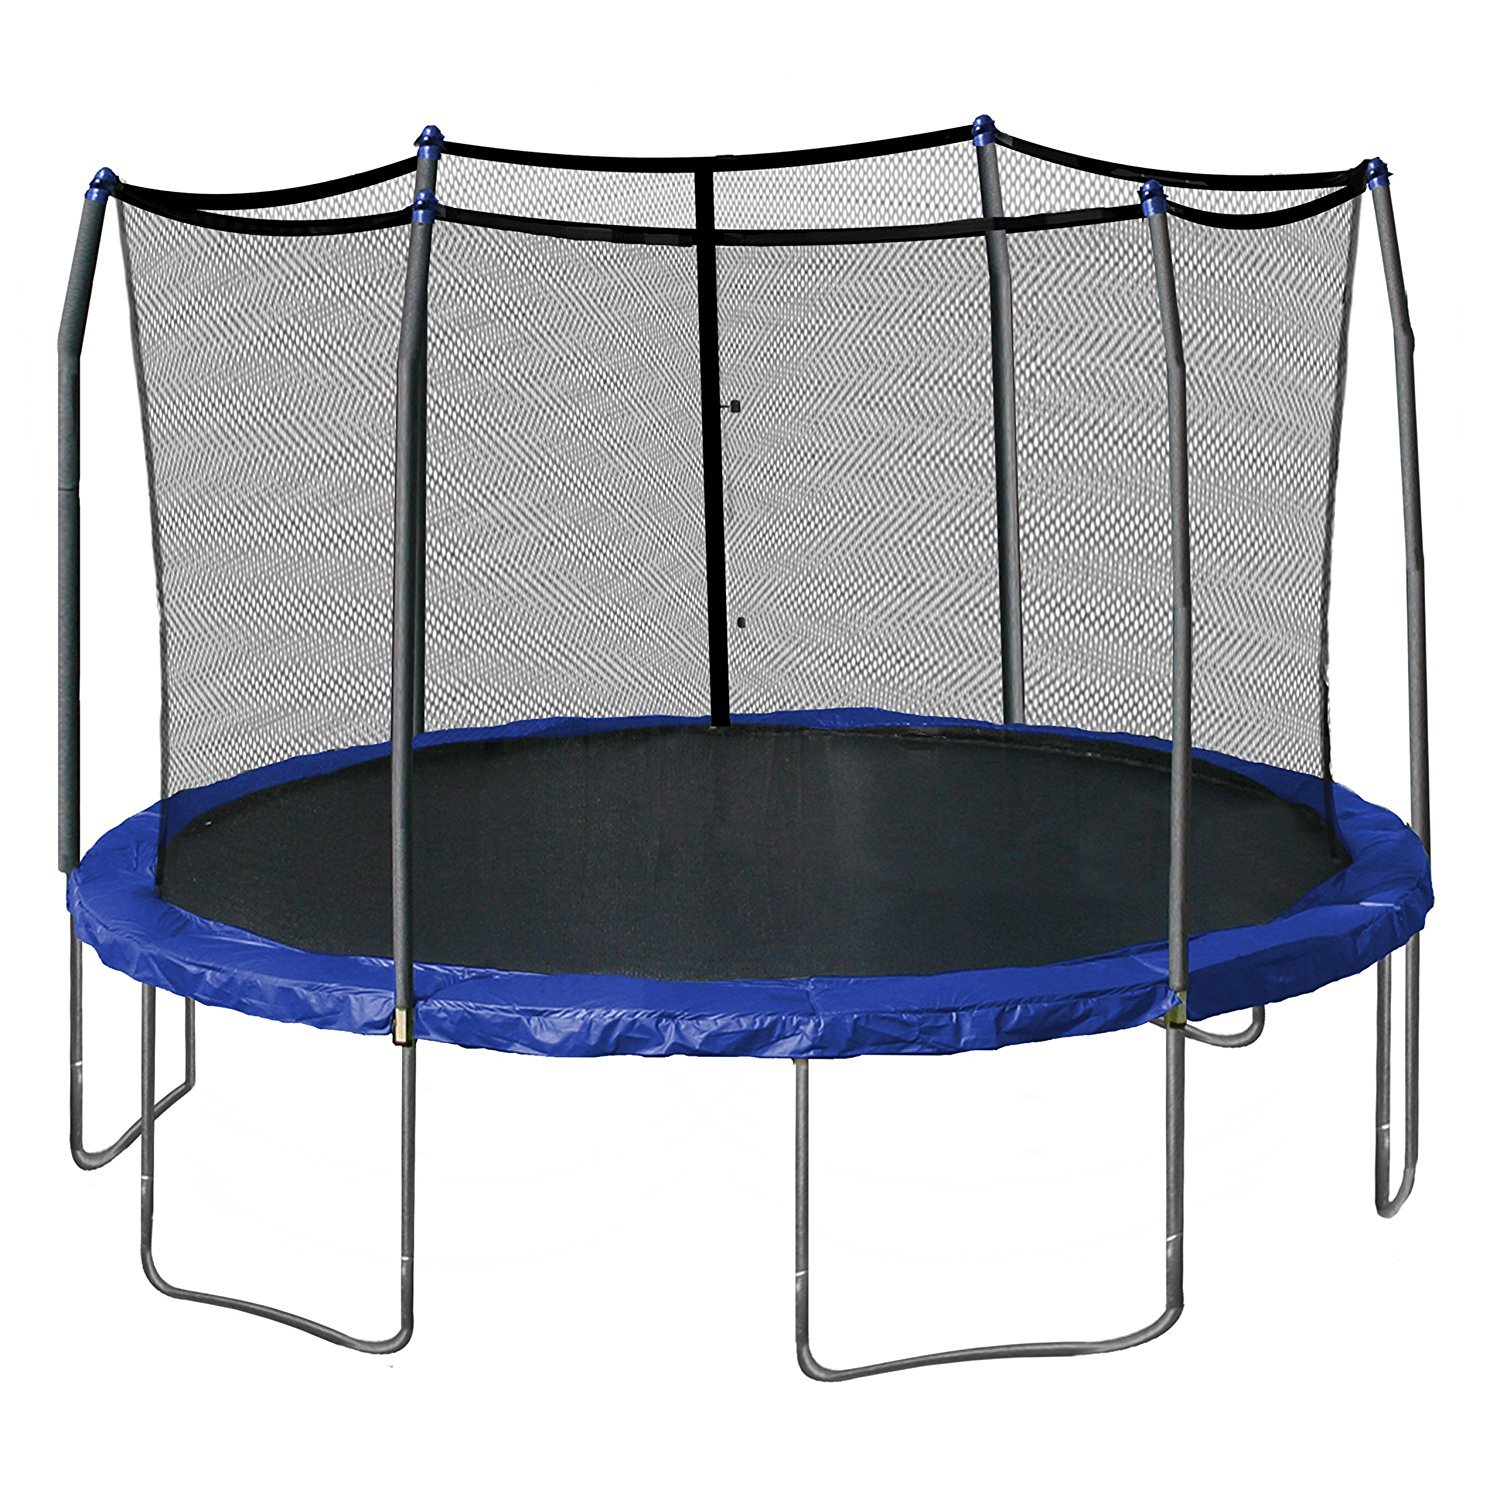 Skywalker Trampolines 15-Feet Round Trampoline and Enclosure with Spring Pad Review